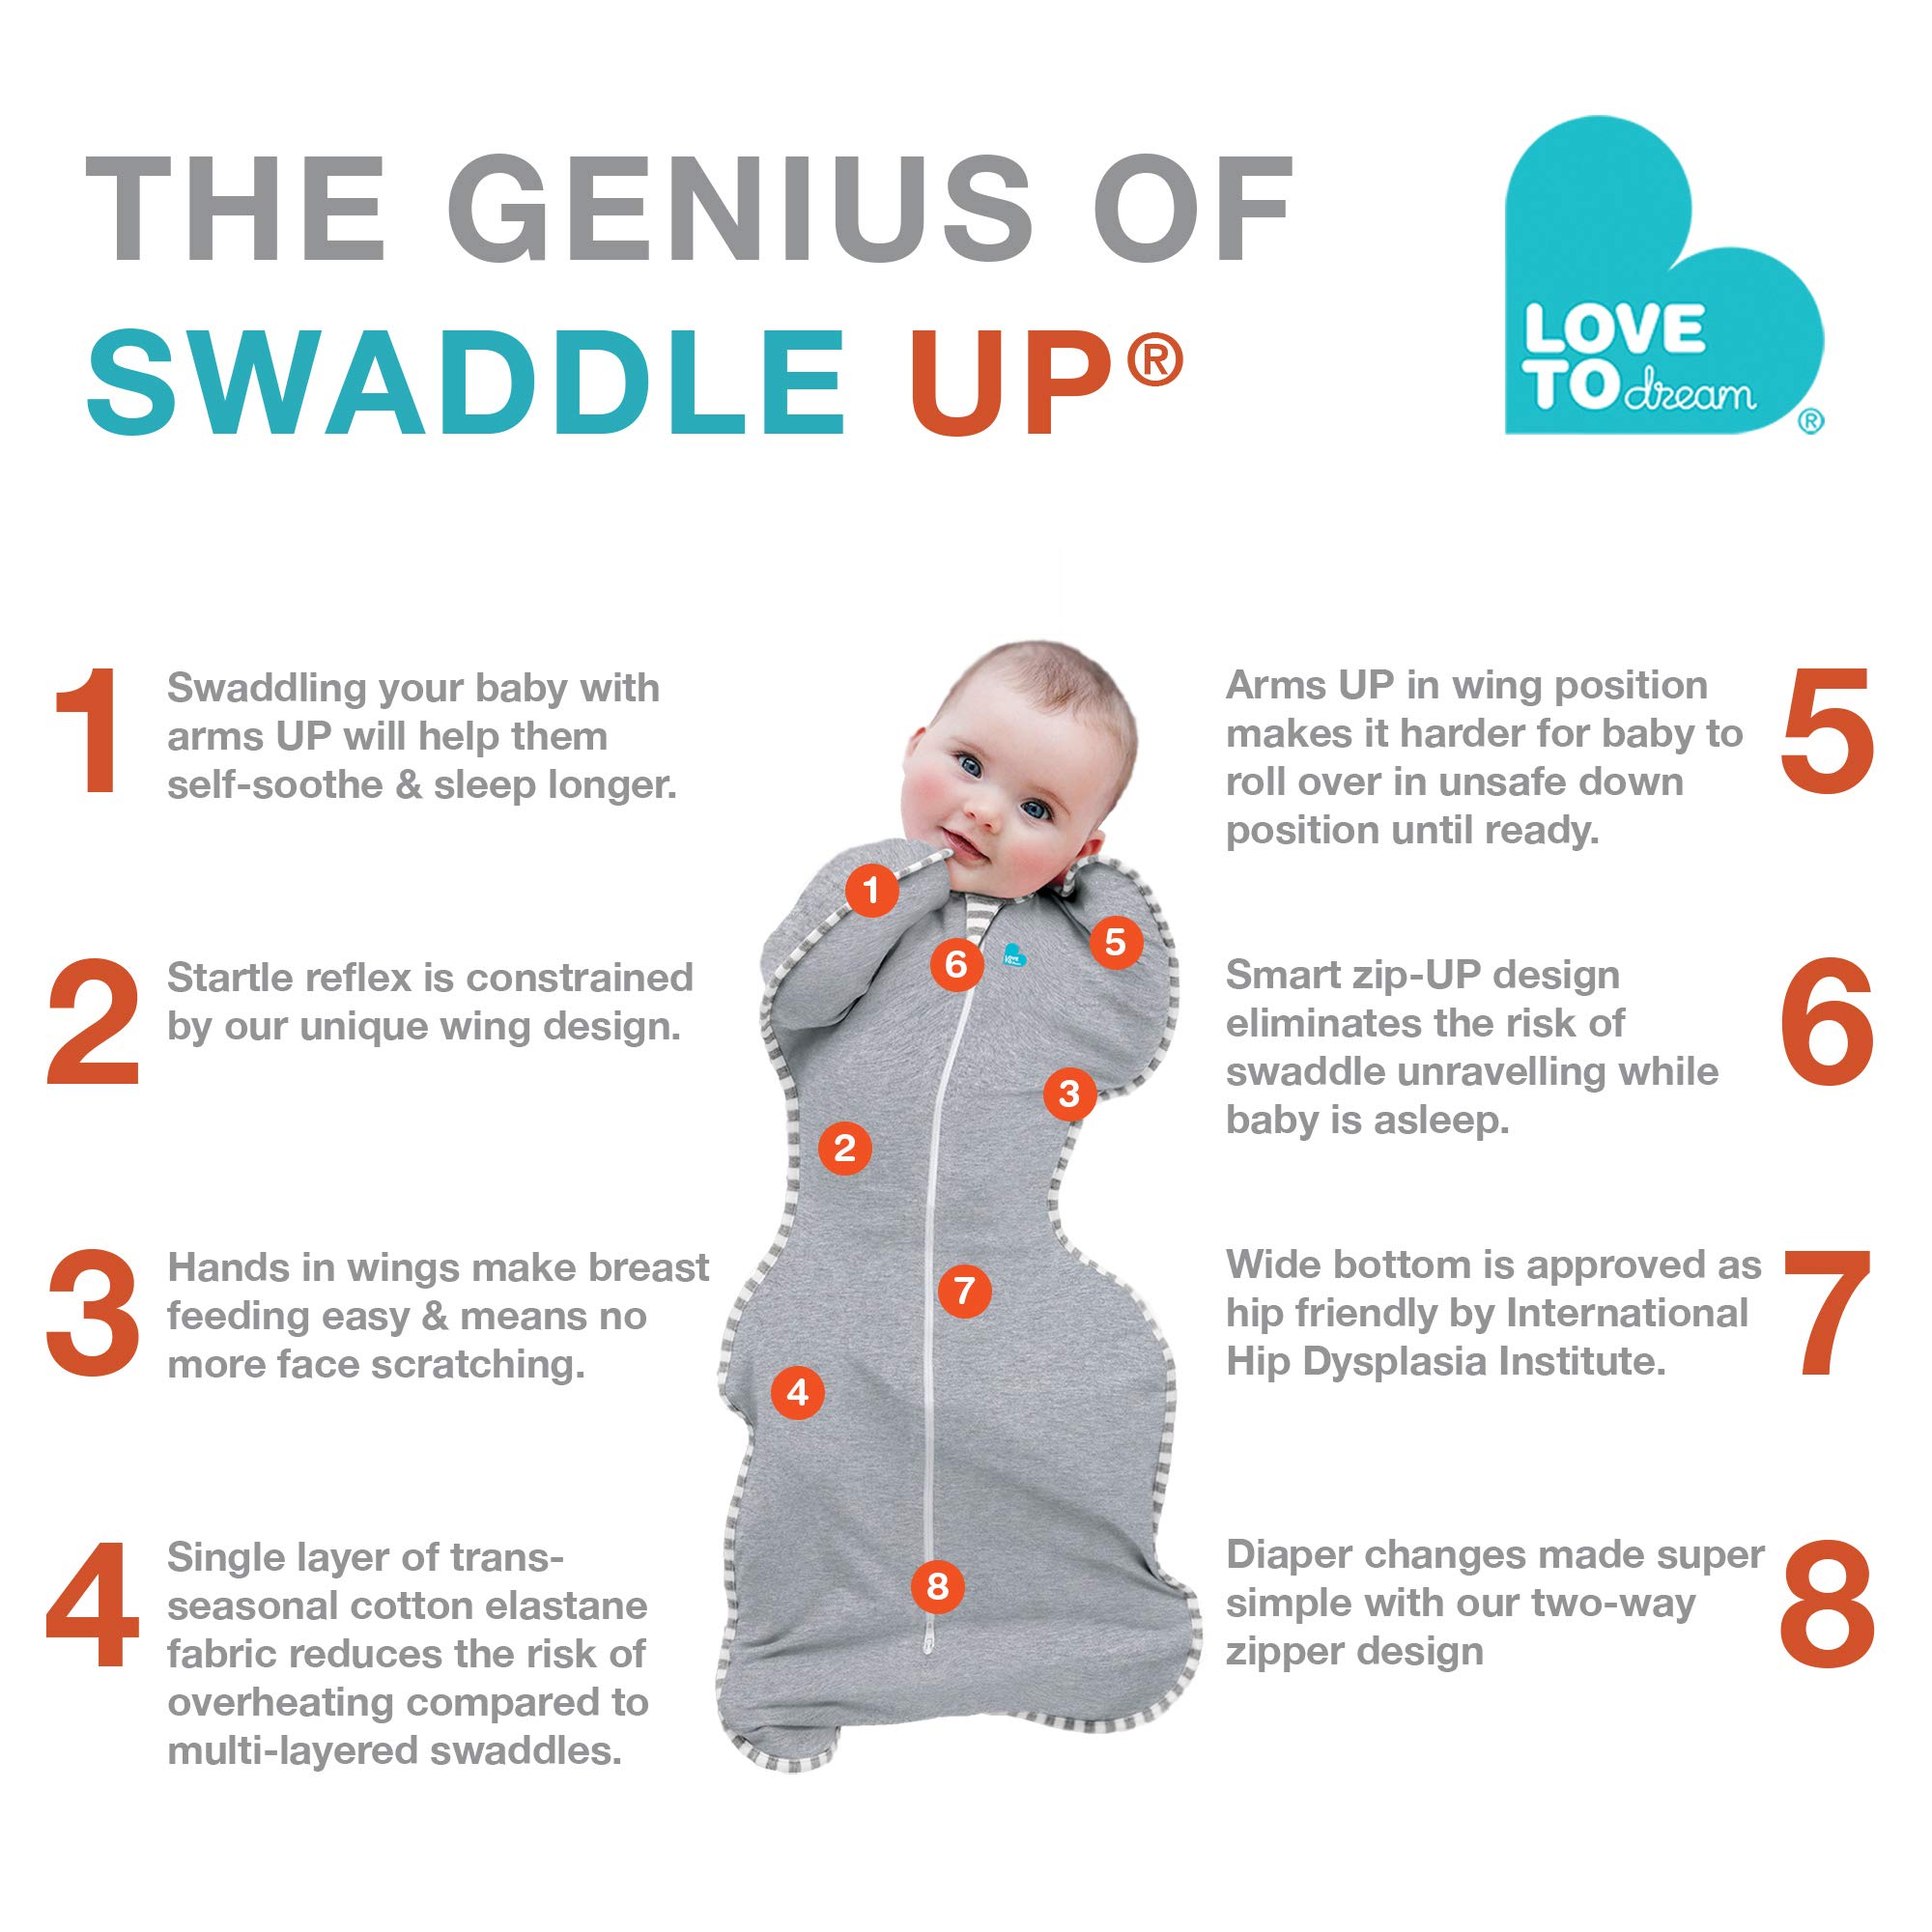 Love To Dream Swaddle UP, Blue, Medium, 13-18.5 lbs., Dramatically better sleep, Allow baby to sleep in their preferred arms up position for self-soothing, snug fit calms startle reflex